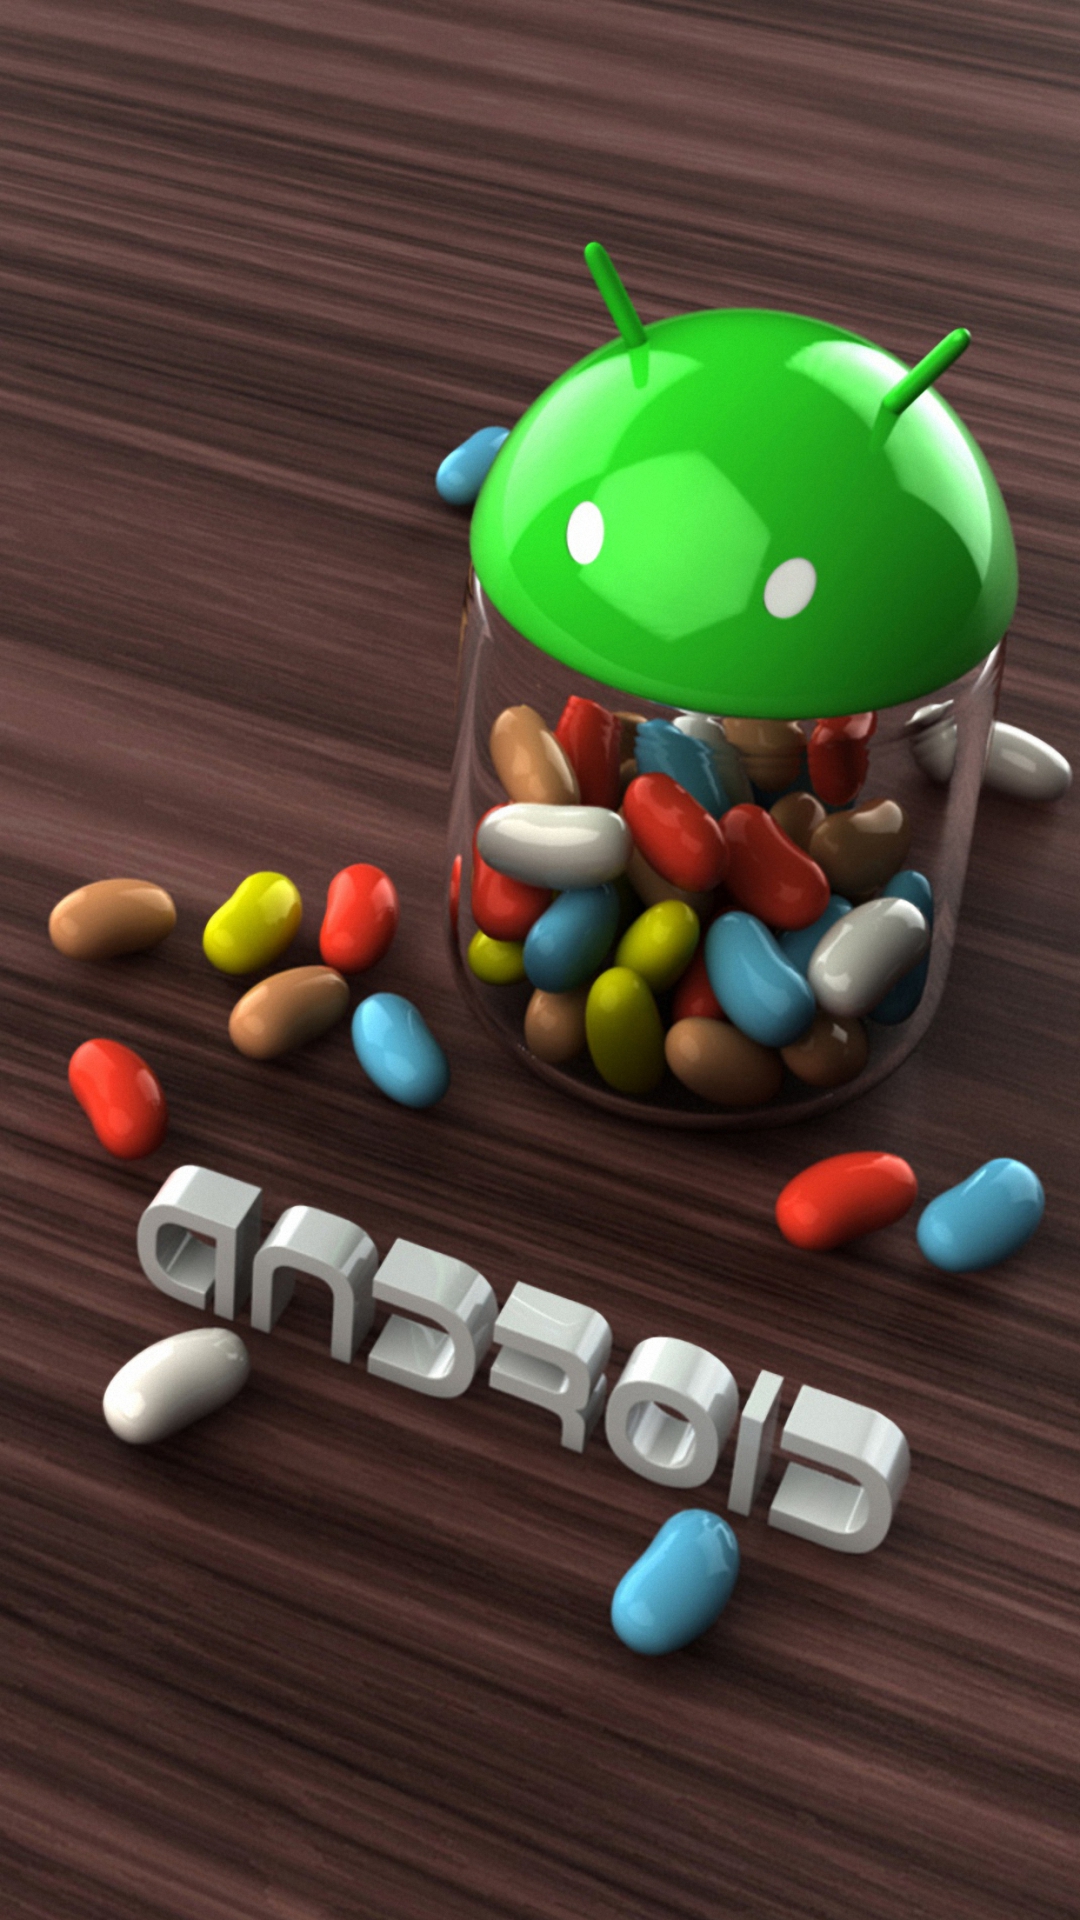 android wallpaper 3d